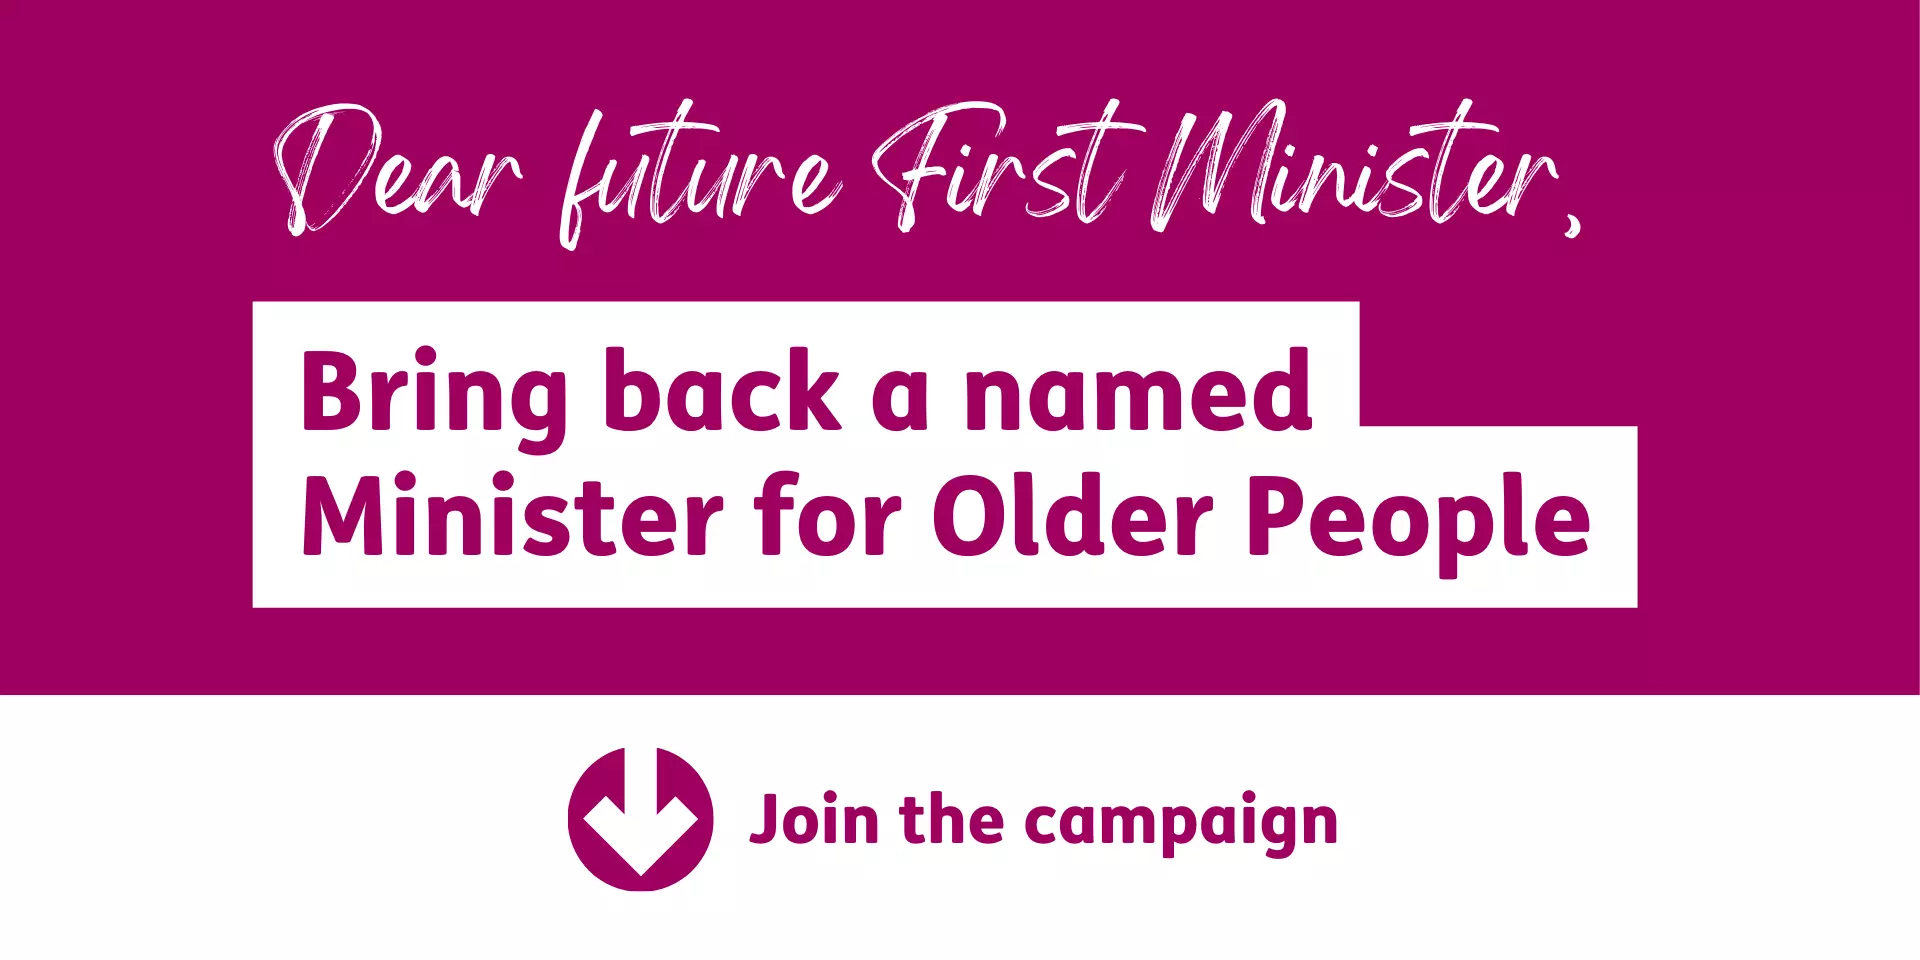 Minister for Older People - Campaign